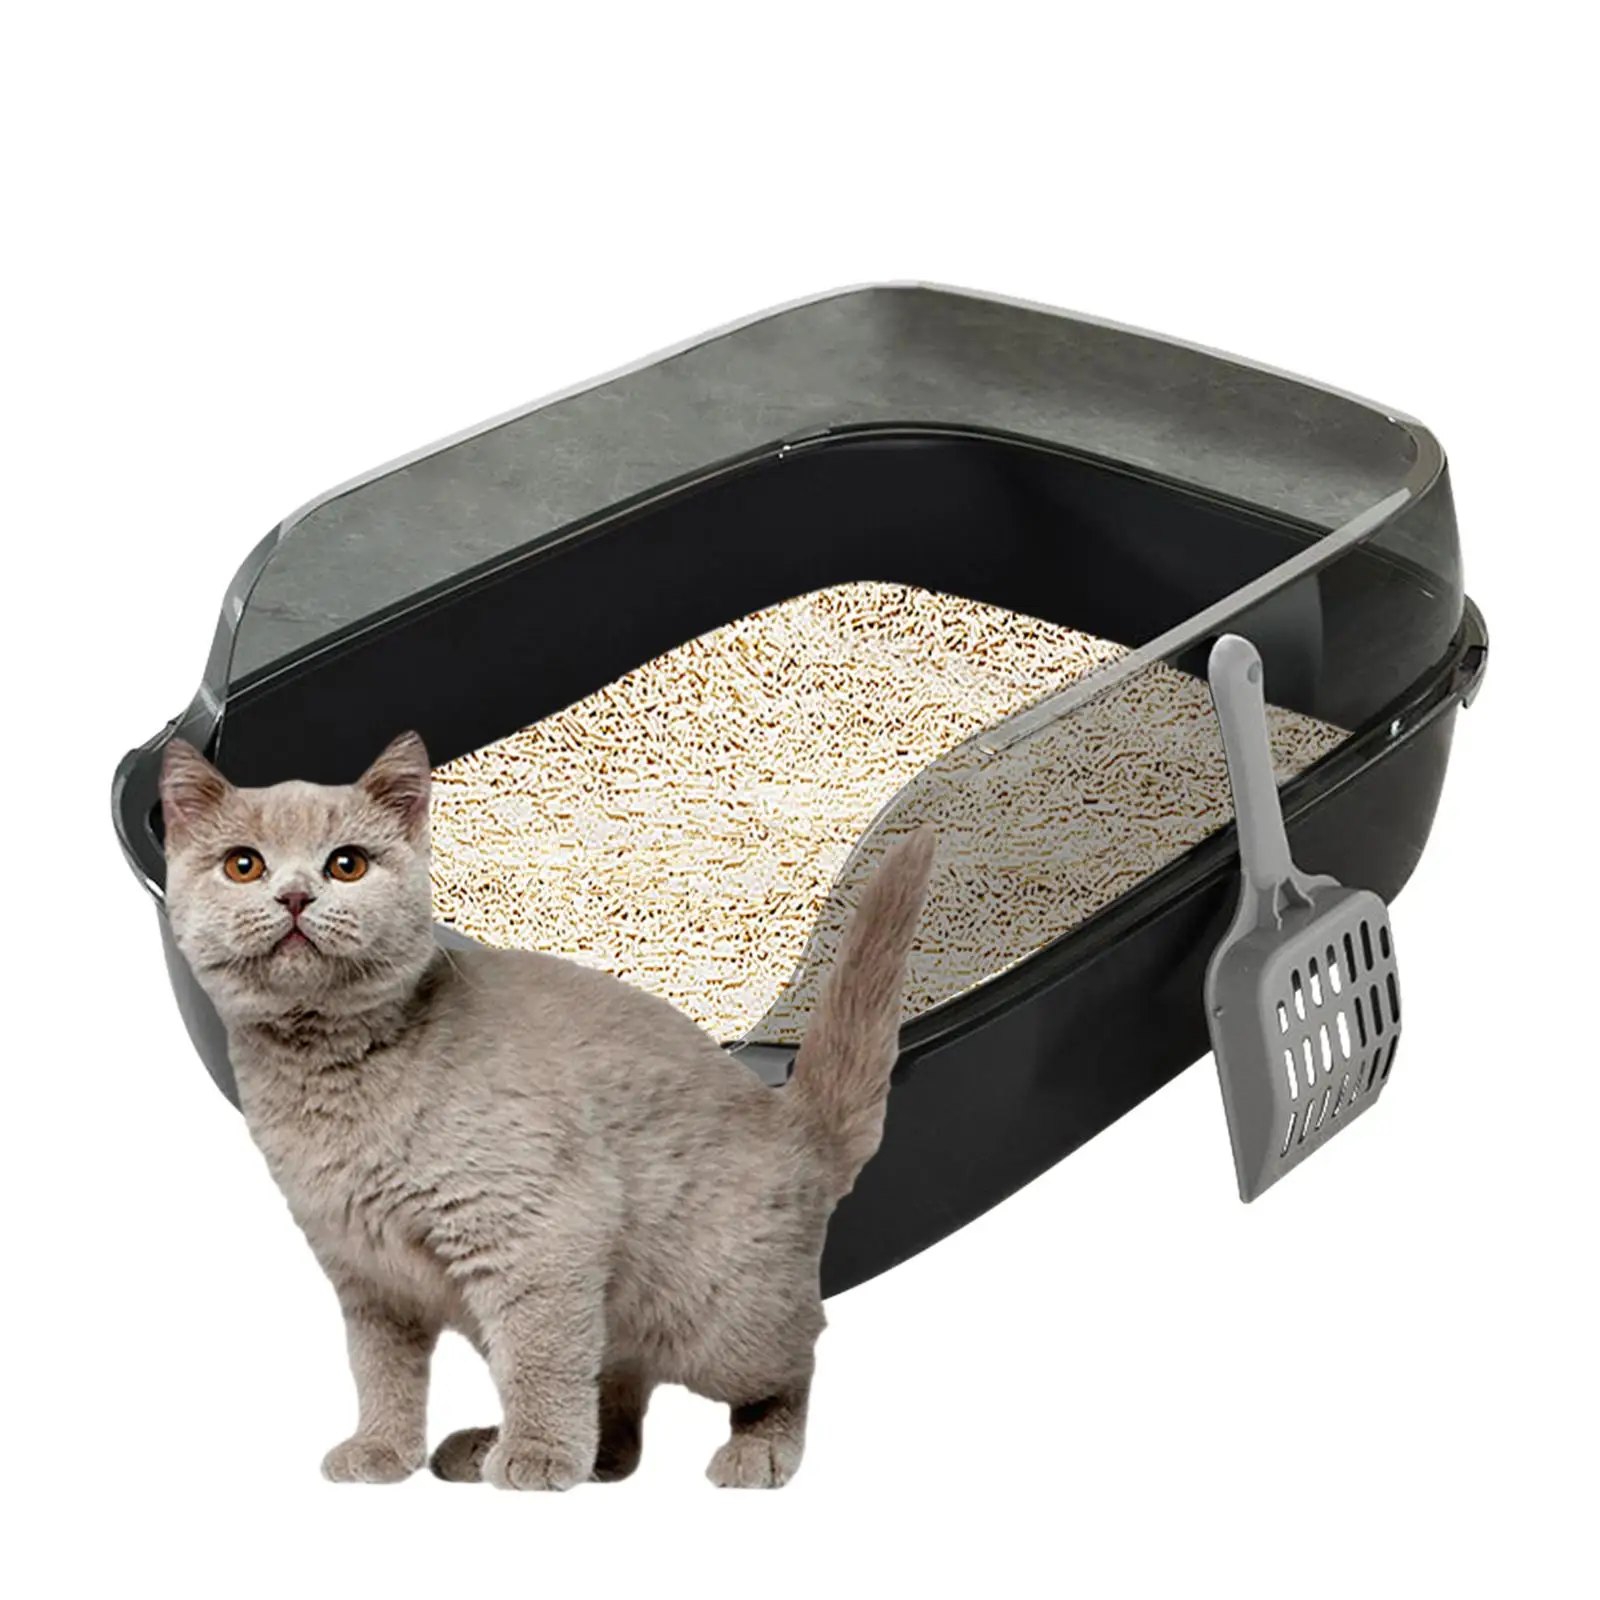 Cat Litter Box Semi Enclosed Easy to Clean Plastic Sturdy Large Detachable Tall Spray Shield Kitty Litter Open Top Cat Kitty